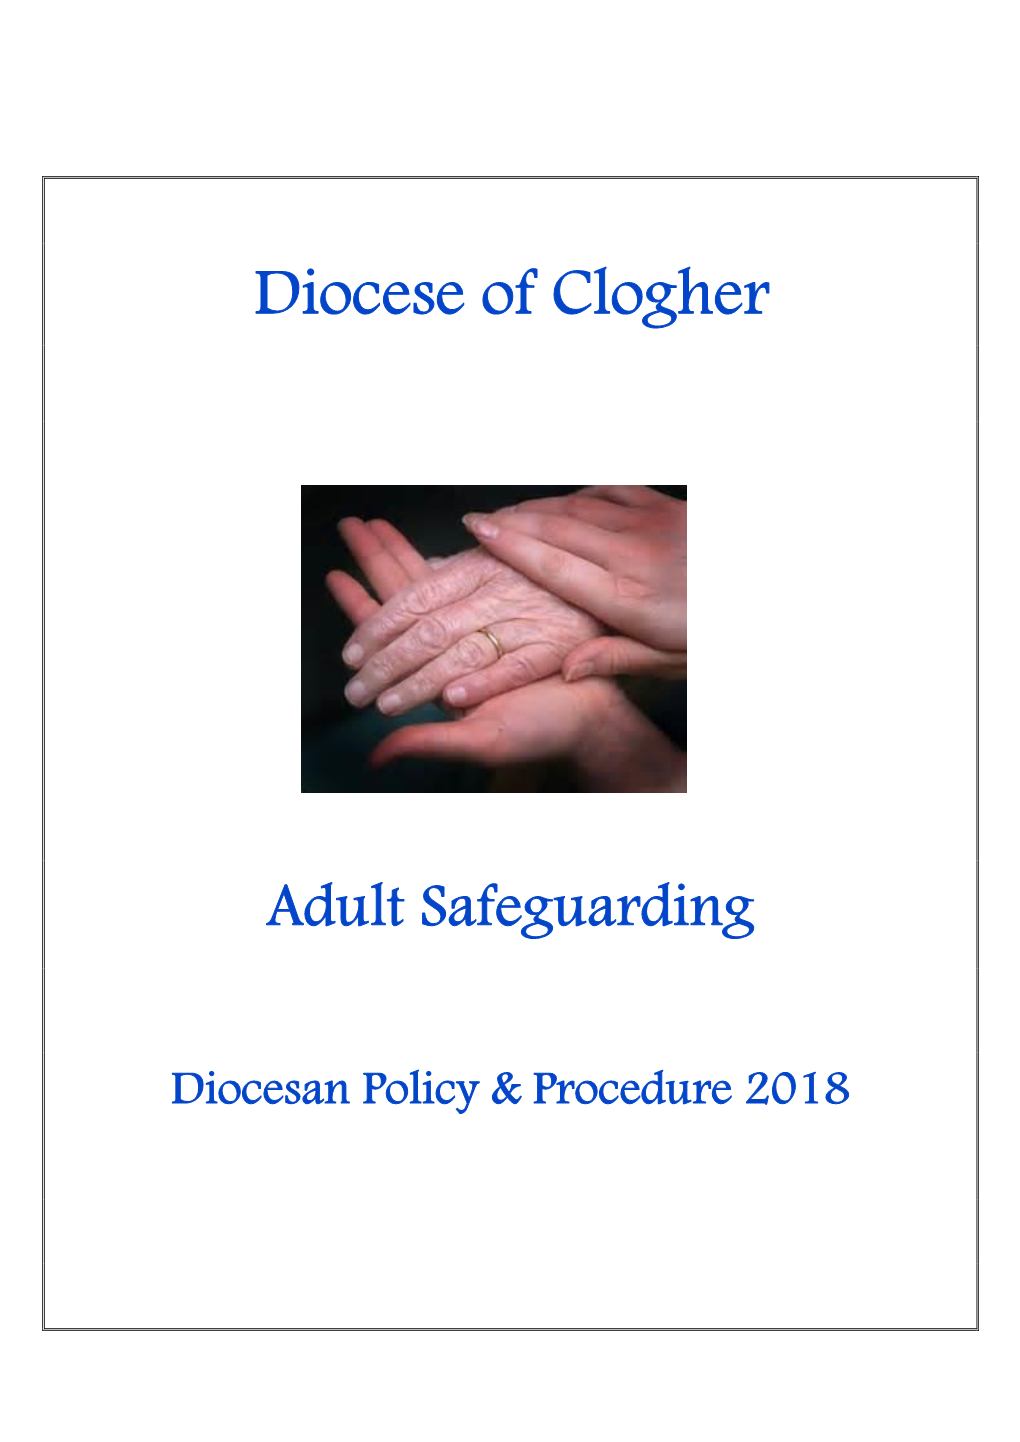 Adult Safeguarding Policy